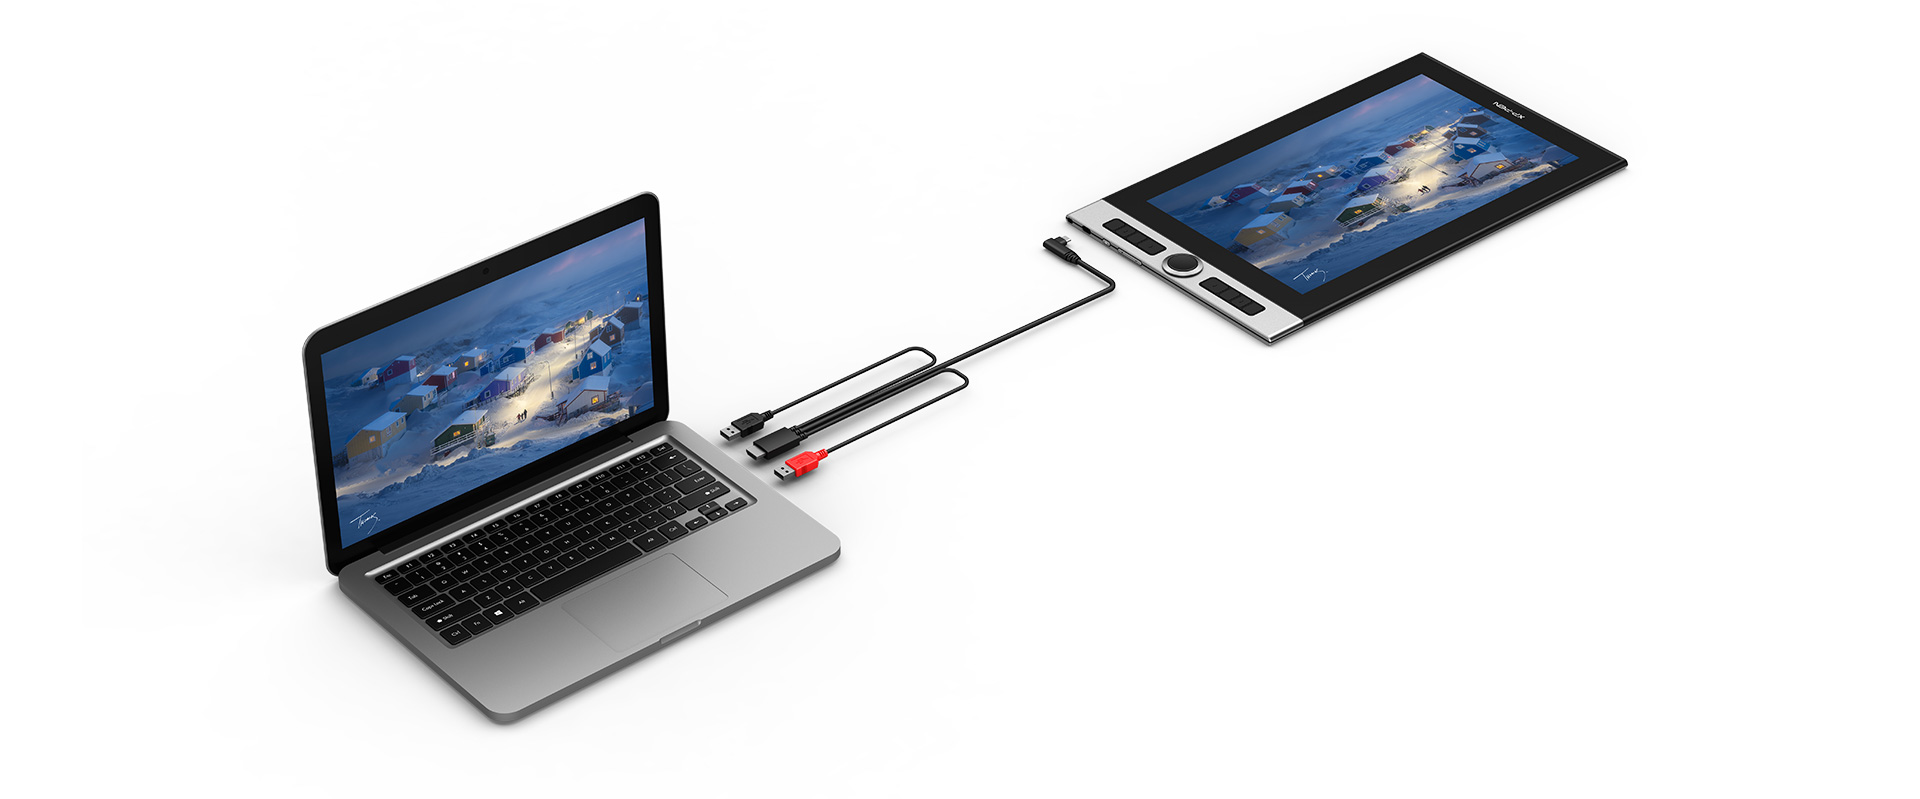 XP-Pen Innovator 16 connect to pc with convenient three-in-one cable 